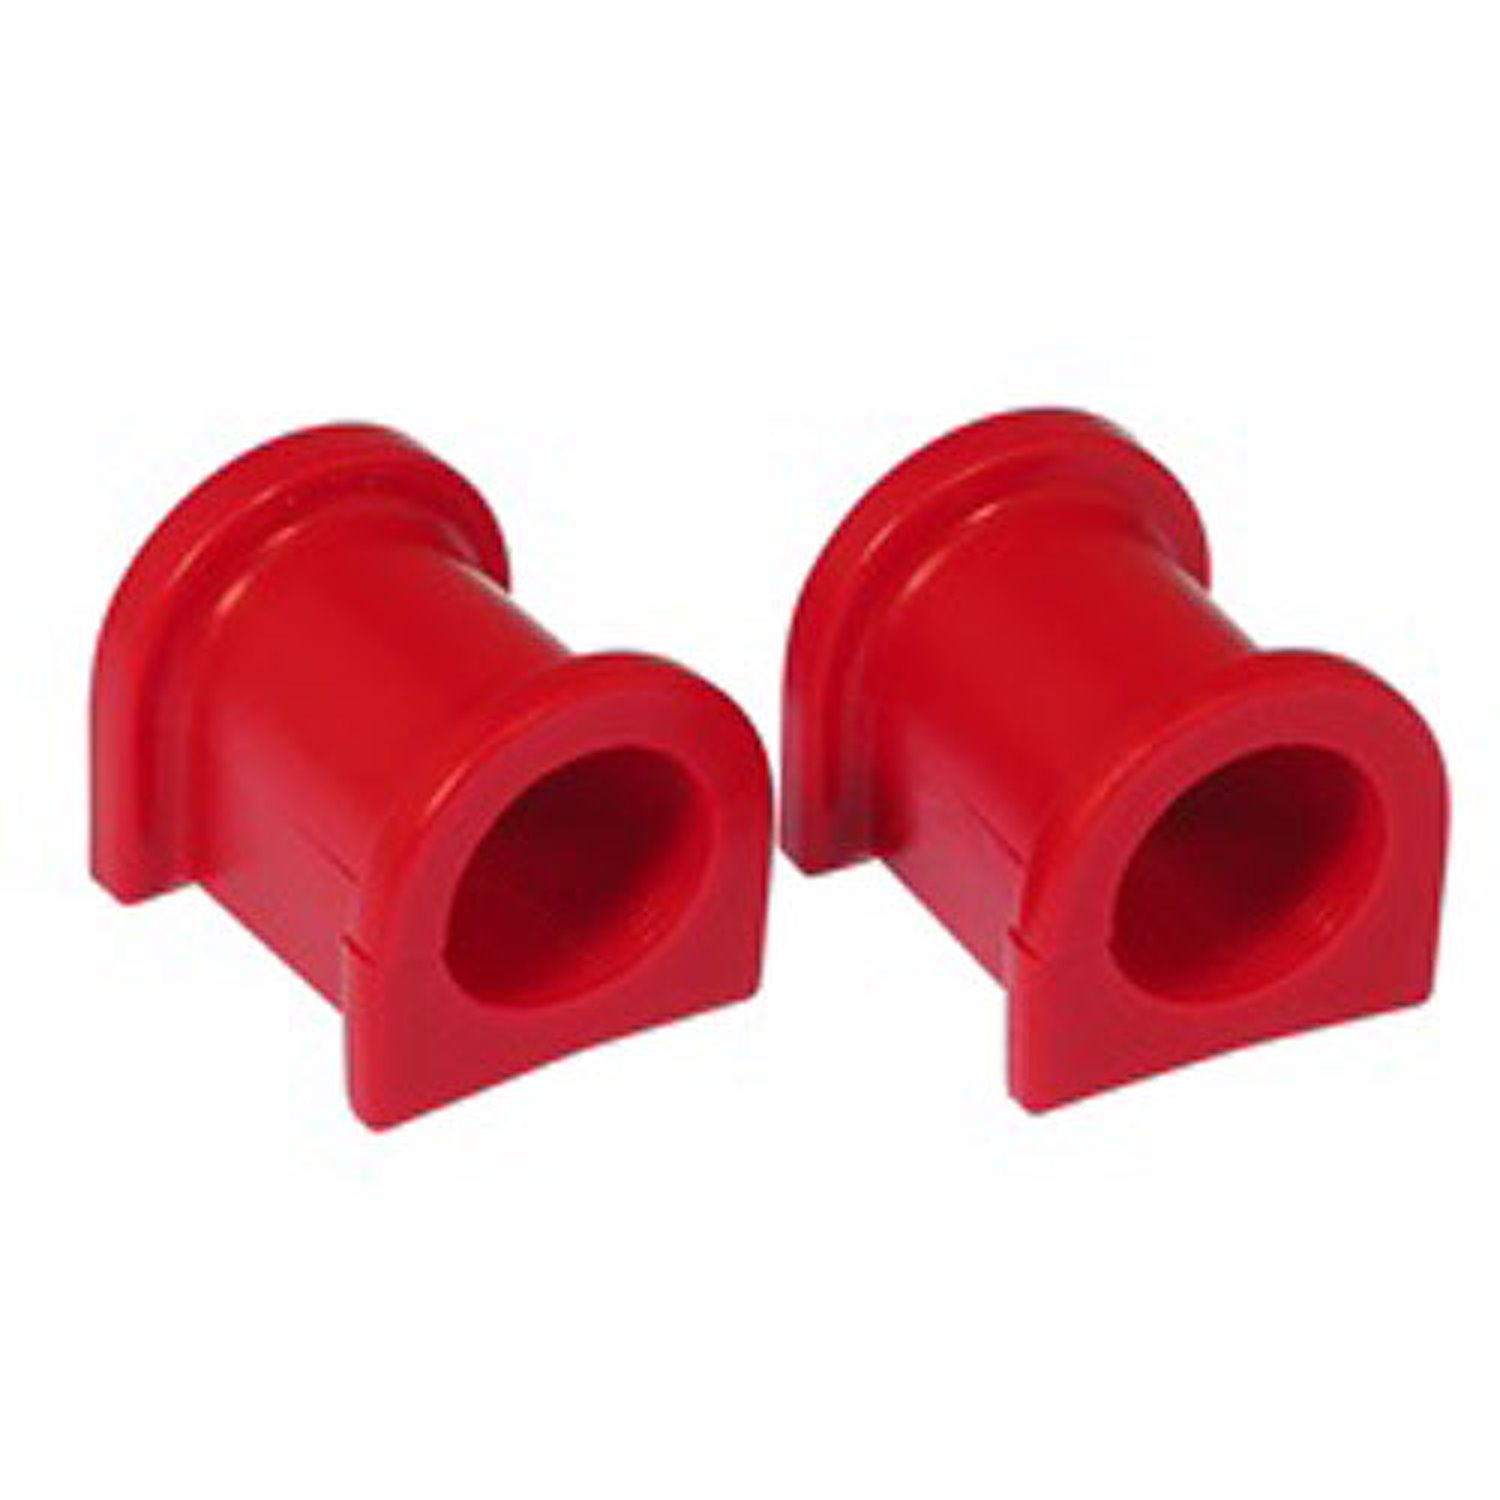 EVO 8 FRONT 22MM SWAY BAR BUSHINGS Red